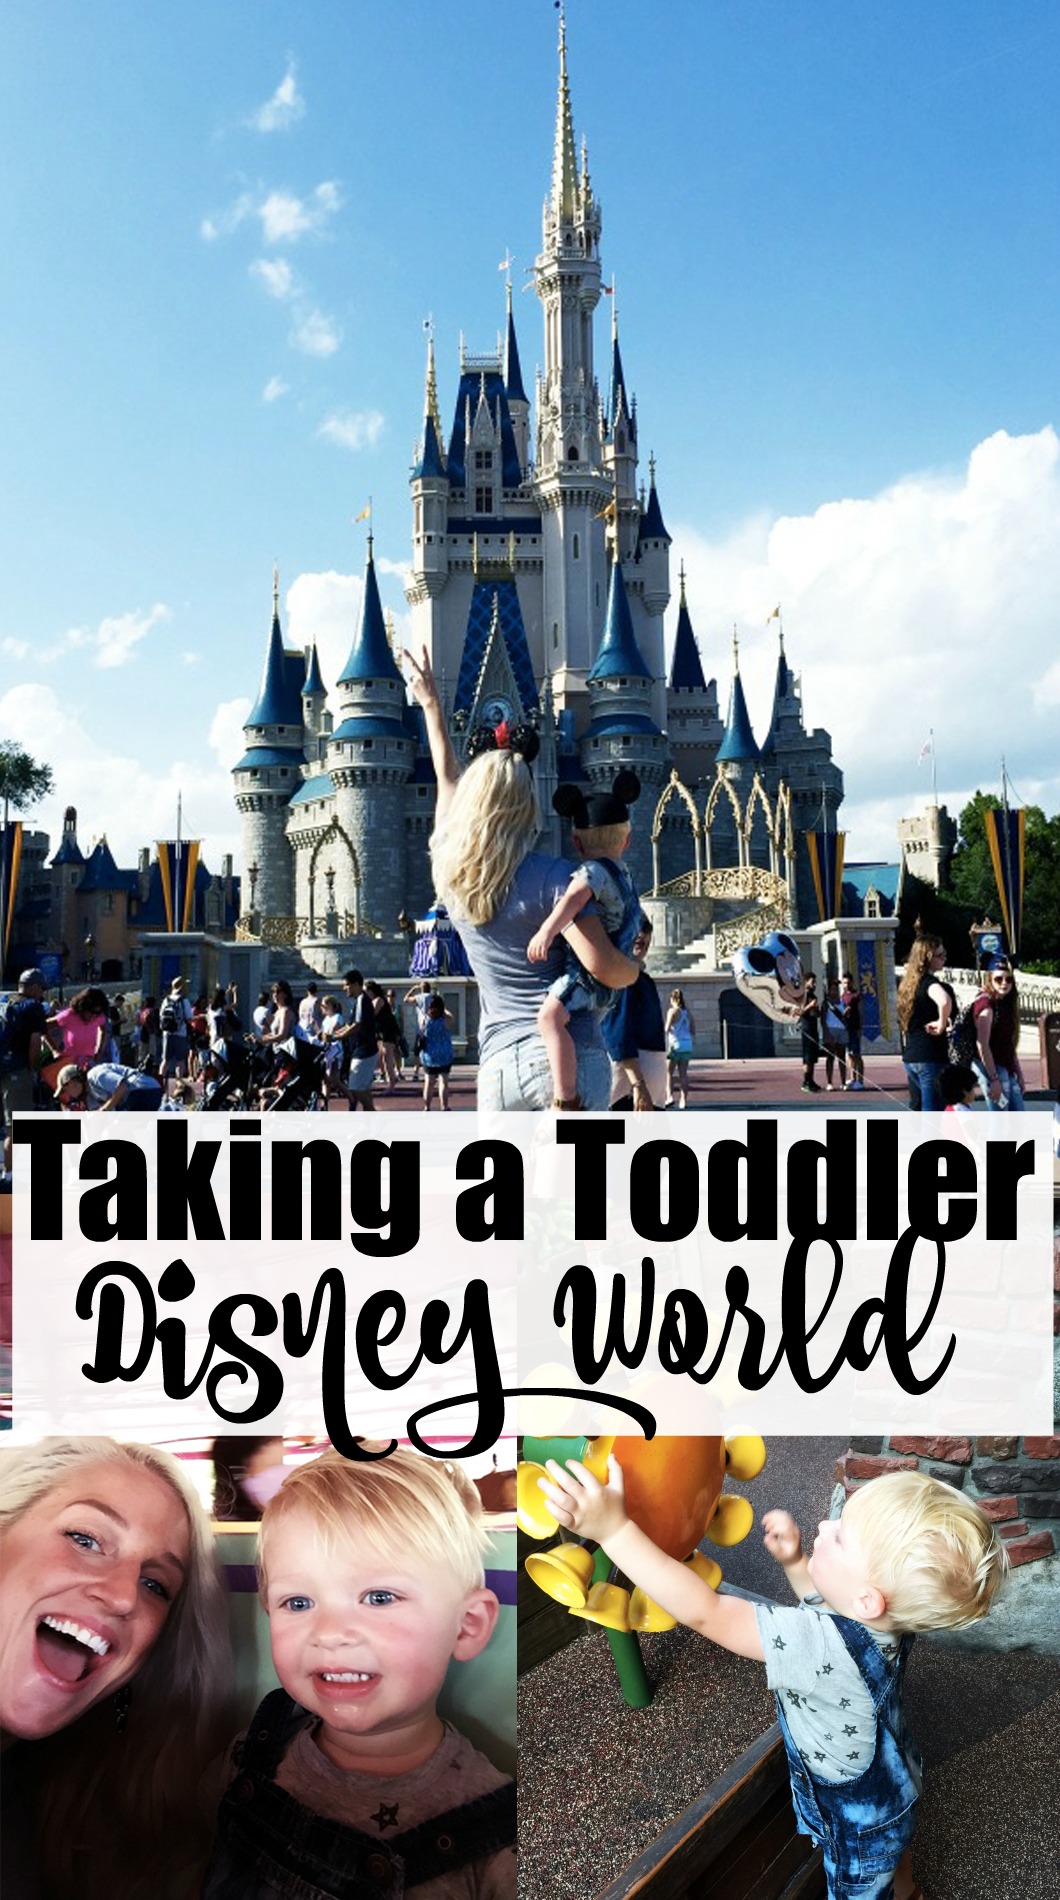 Taking Toddler to Disney World - Disney World With Toddlers by Atlanta travel blogger Happily Hughes